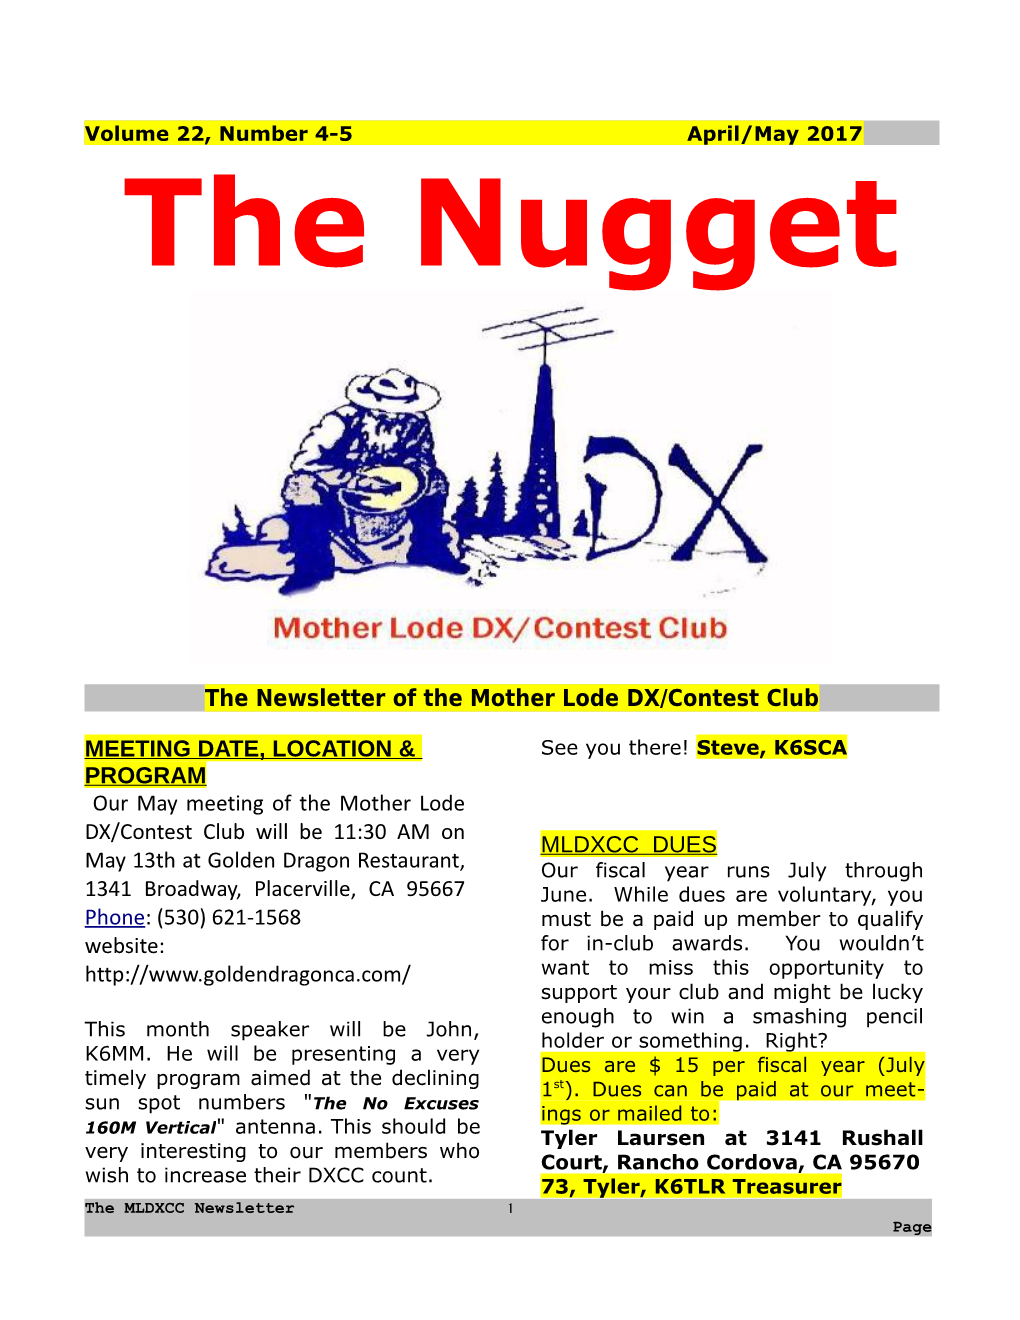 The Newsletter of the Mother Lode DX/Contest Club s2